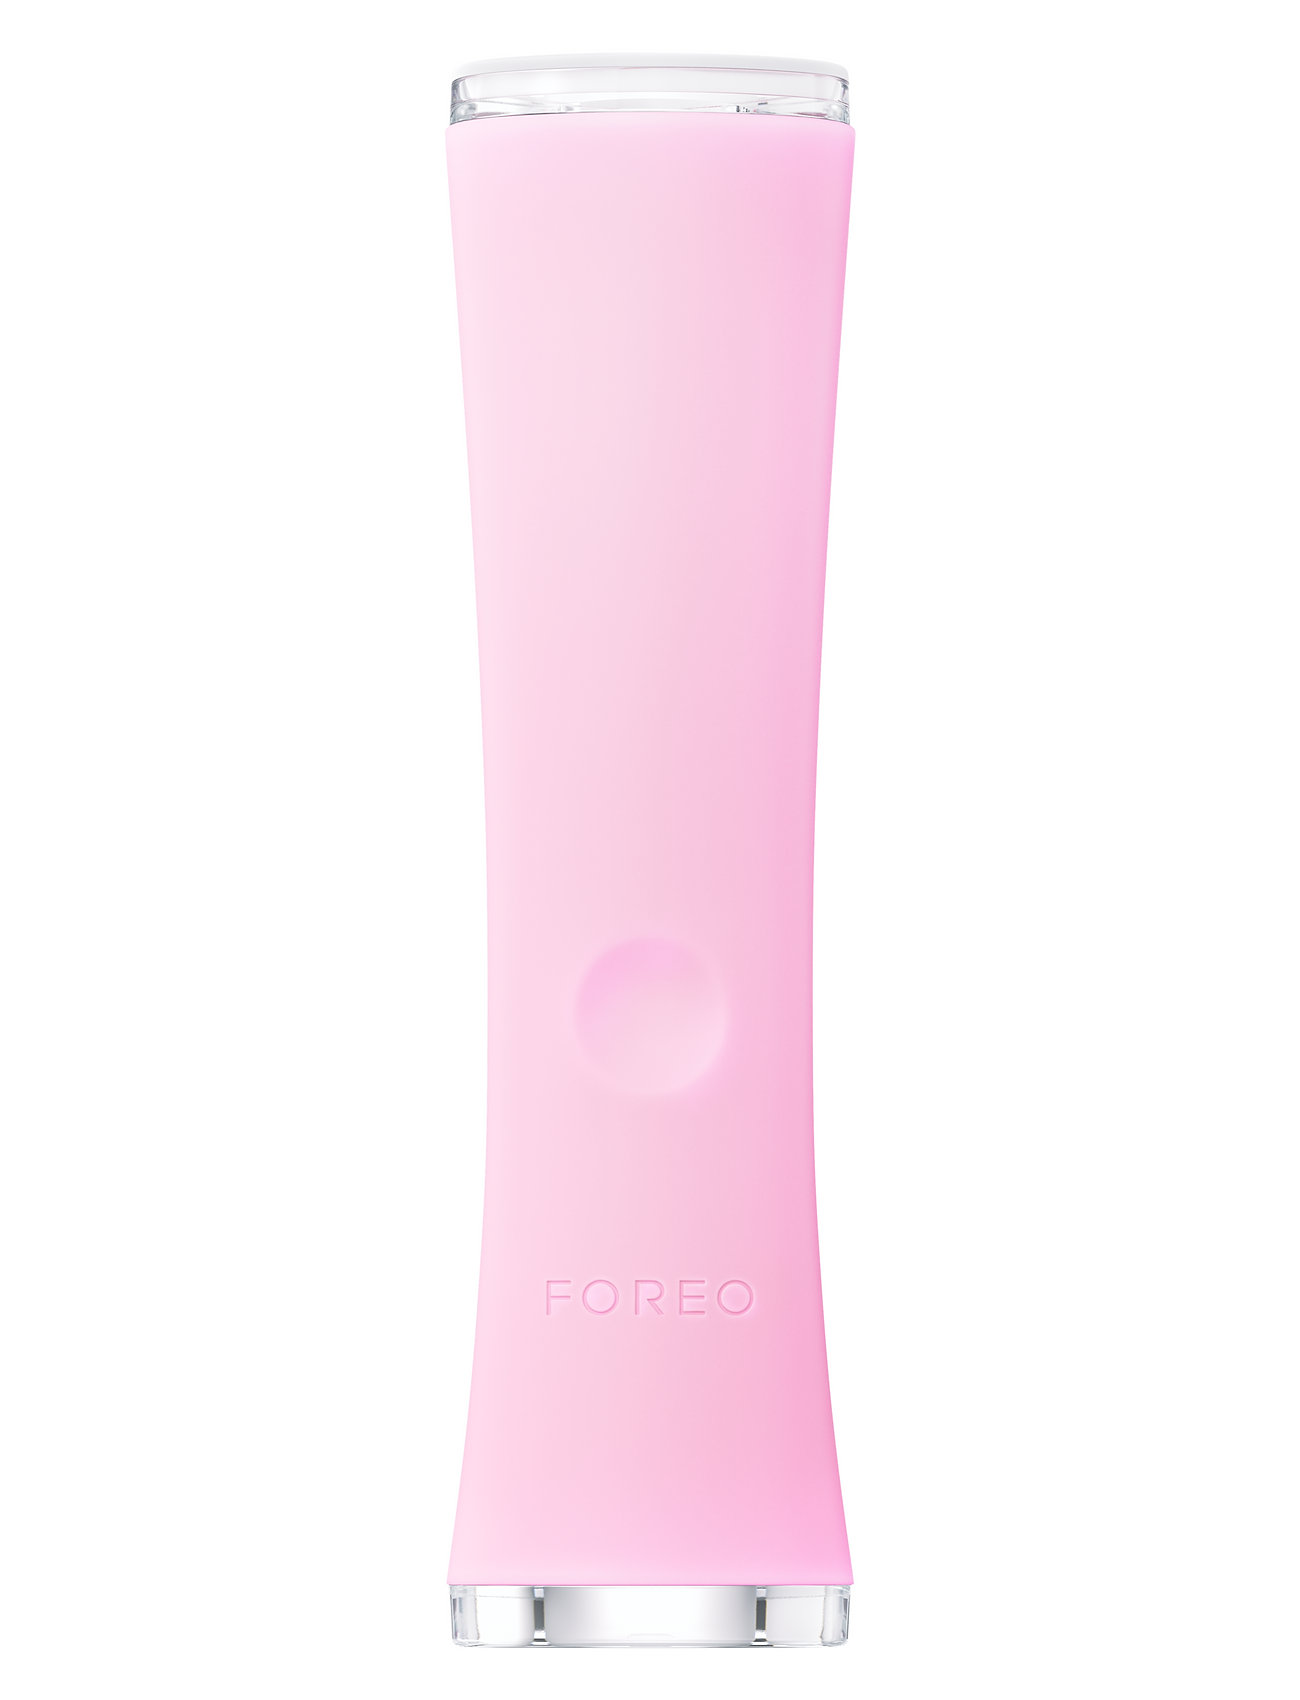 Espada™ 2 Pearl Pink Beauty Women Skin Care Face Cleansers Accessories Pink Foreo